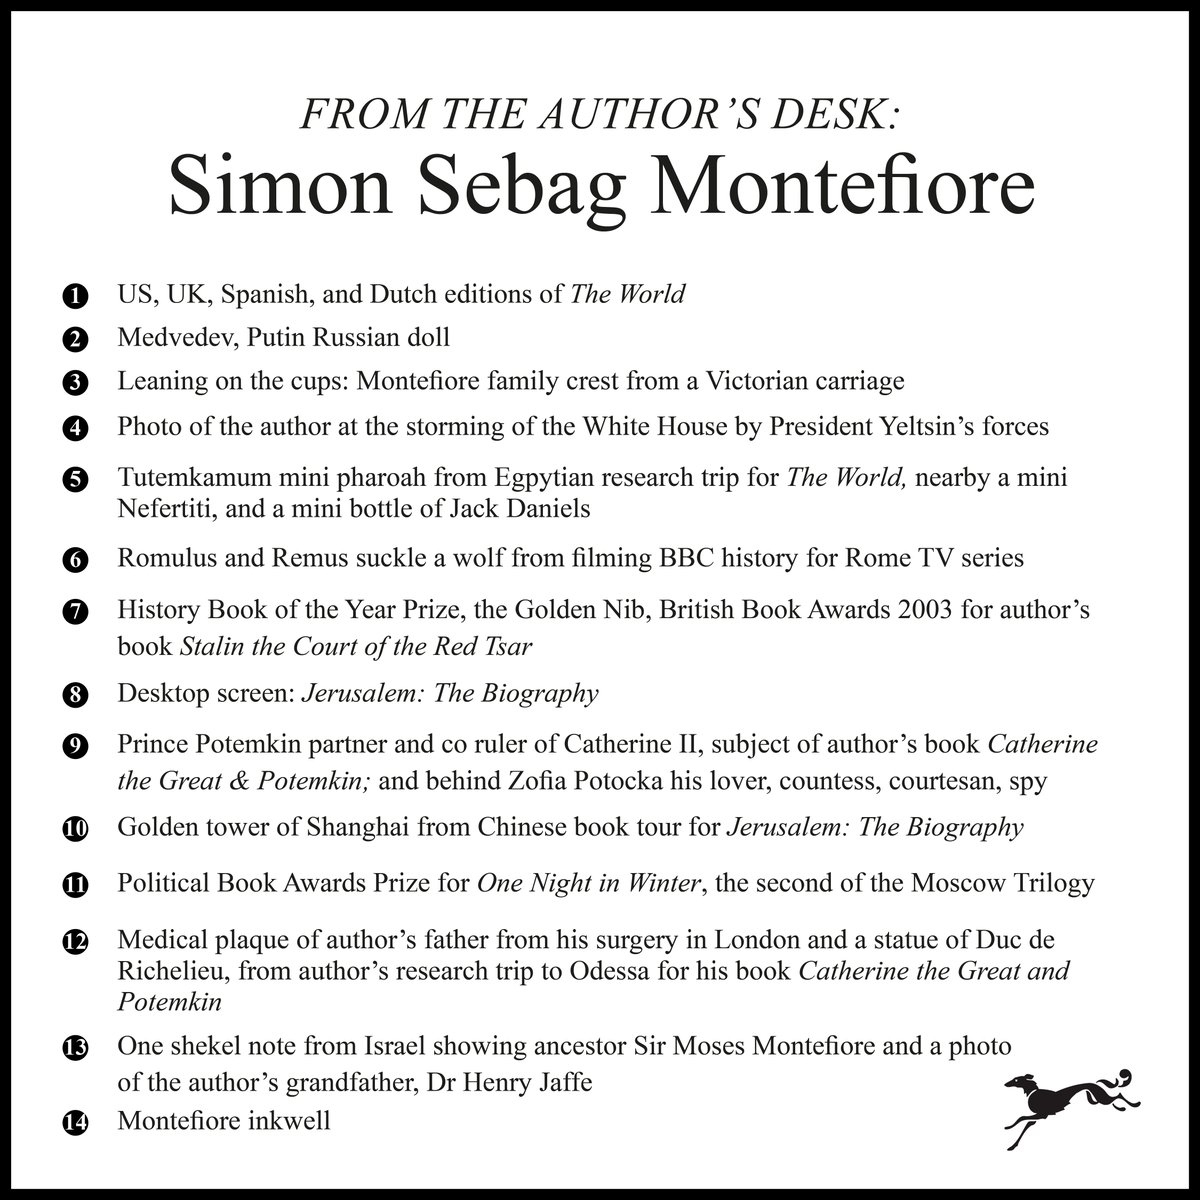 See what worldly and family items are on the author of THE WORLD’S desk! 

@simonmontefiore #TheWorldaFamilyHistory